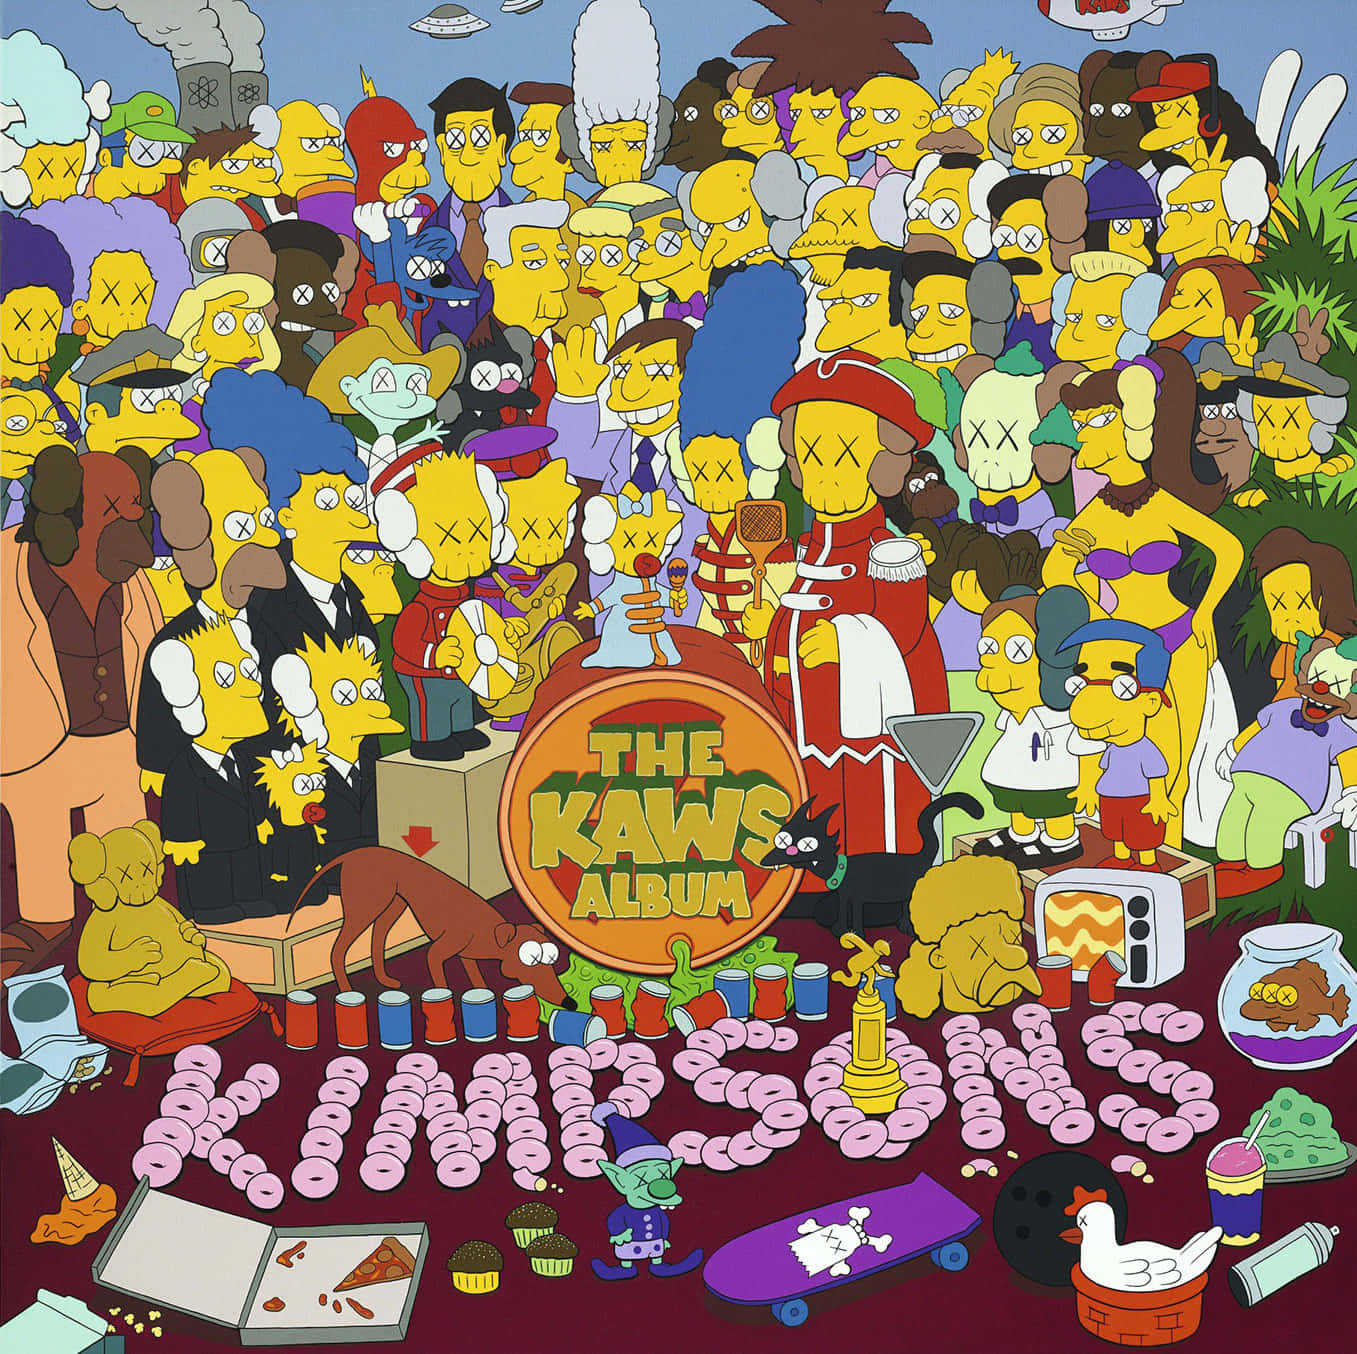 KAWS takes on The Simpsons in a unique artistic collaboration. Wallpaper